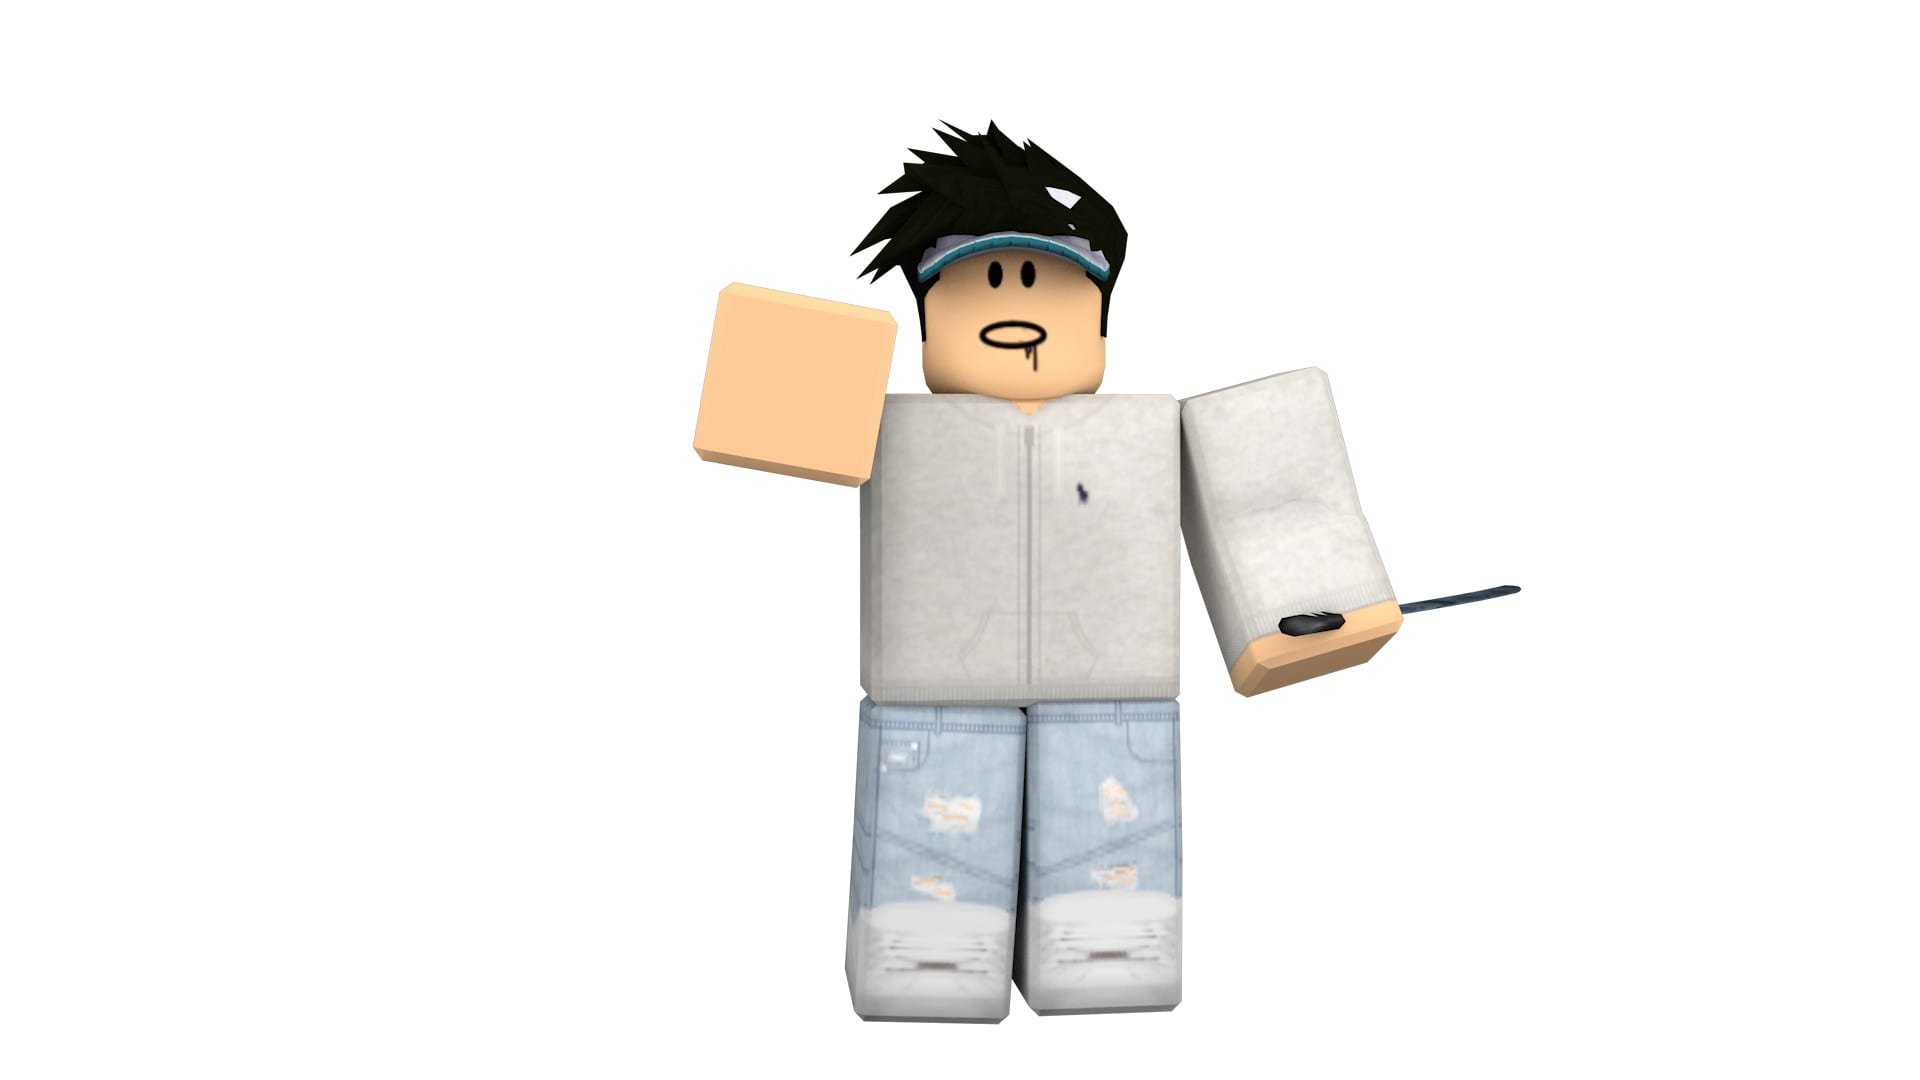 Get Your Own Roblox Gfx By Fruitymoon Fiverr - roblox gfx character